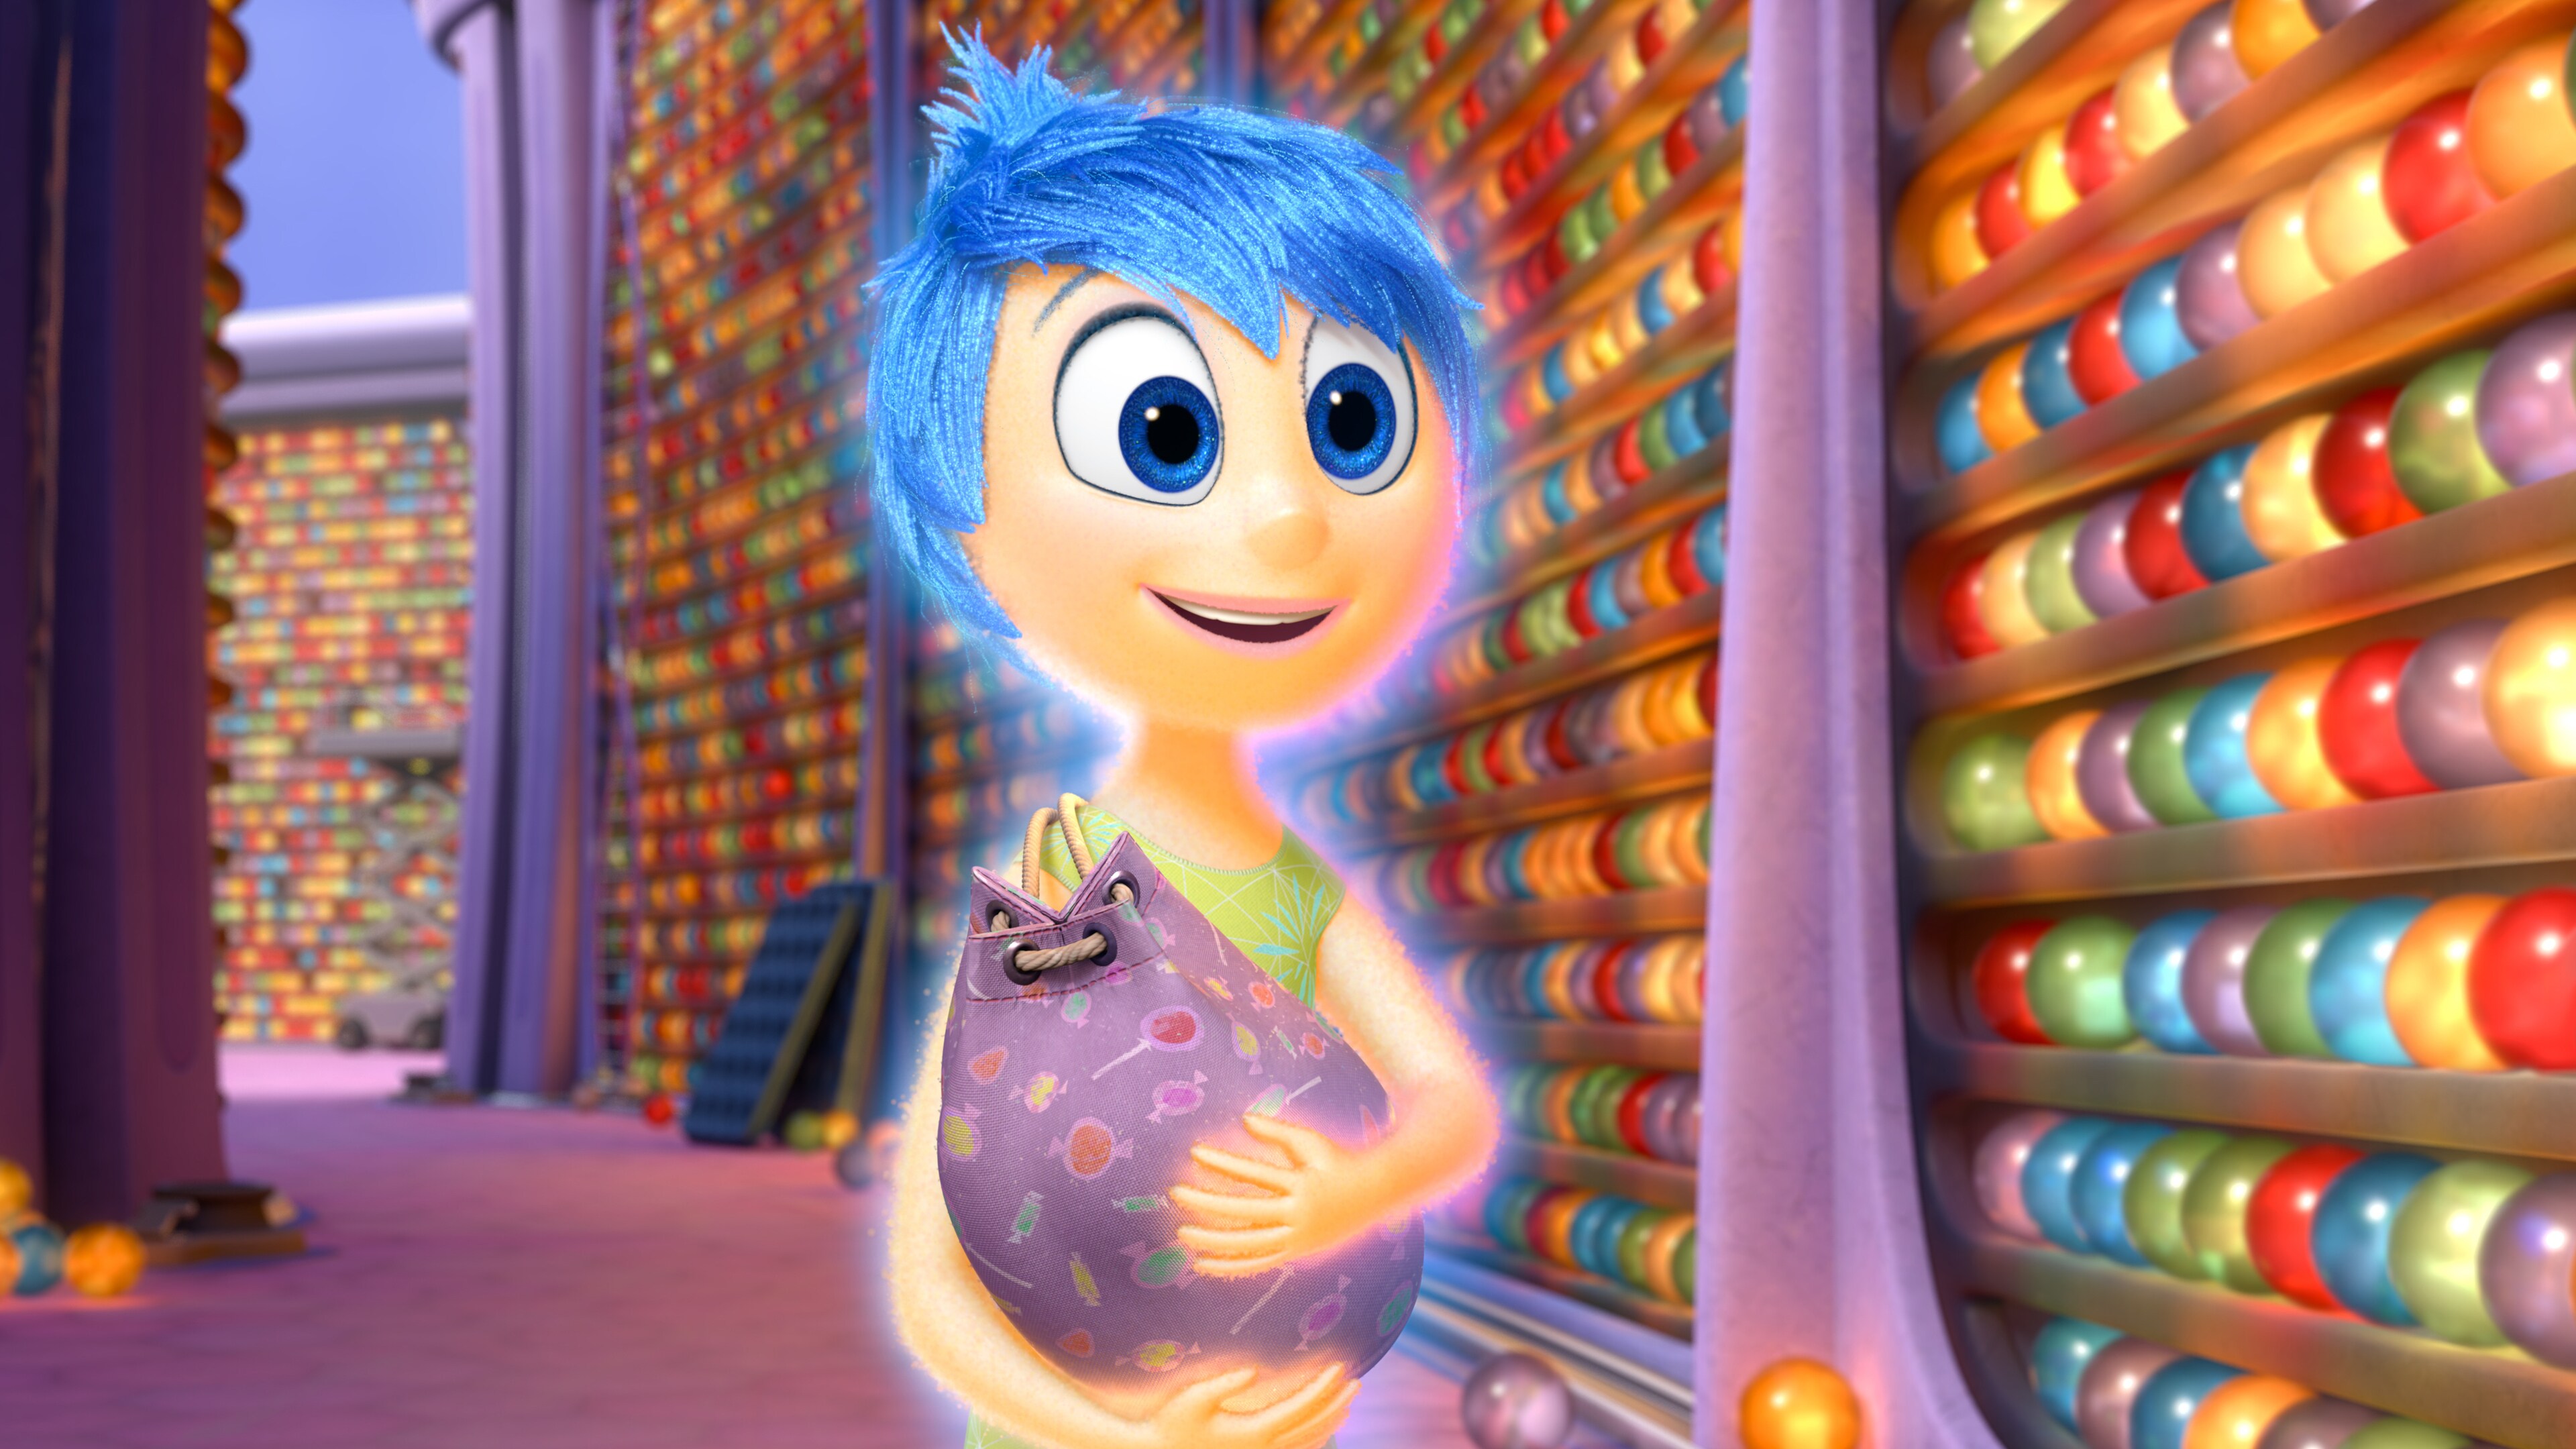 Actor Amy Poehler as Joy holding memories in the movie "Inside Out" 